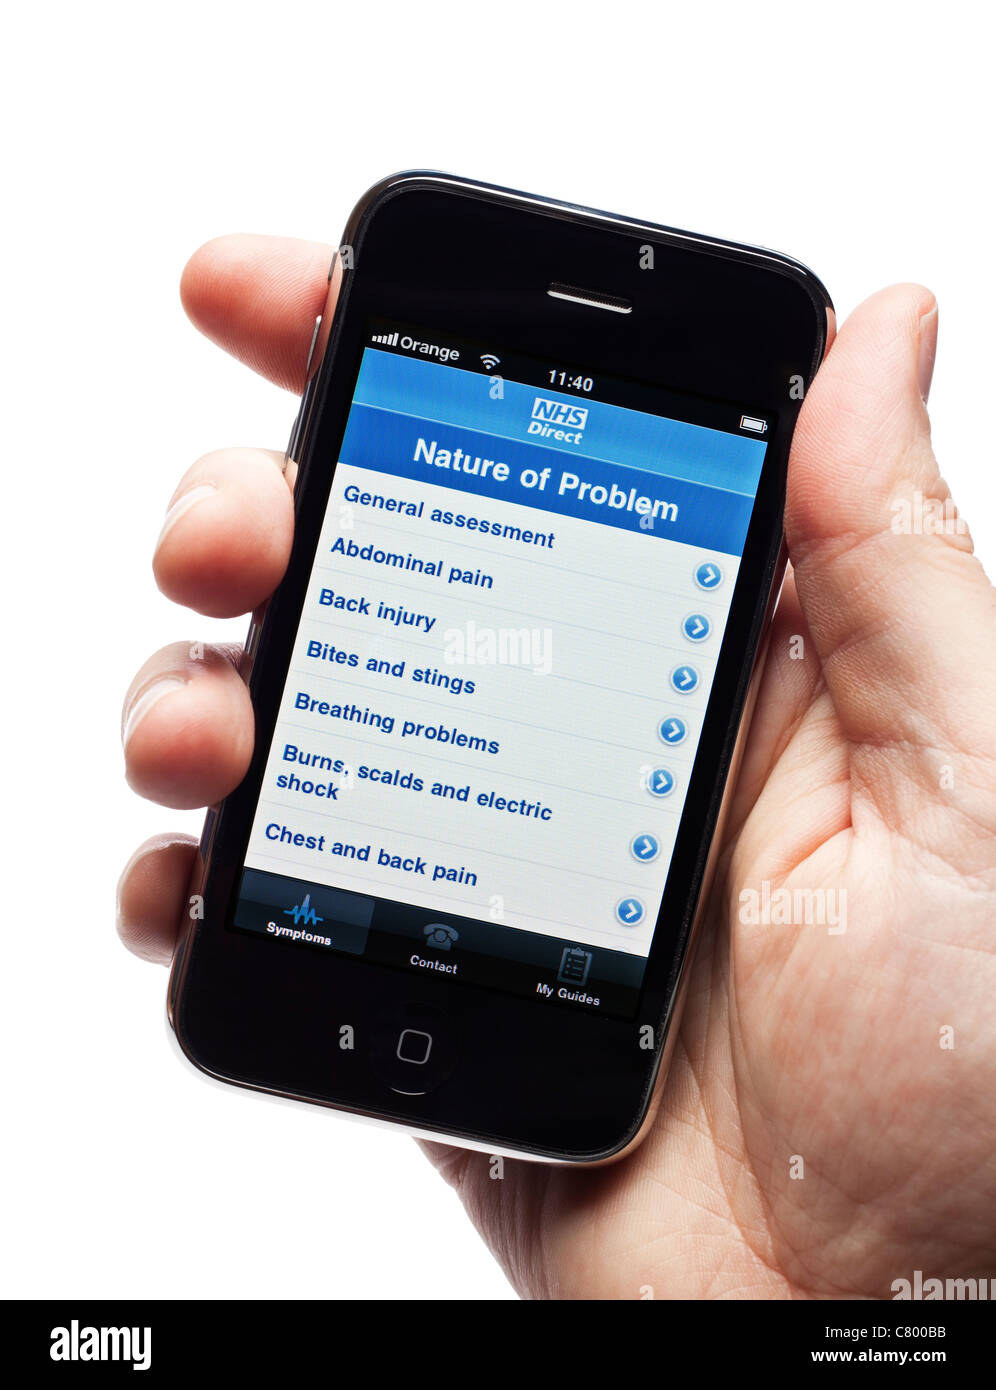 NHS Direct medical advice app on a smartphone smart phone mobile phone Stock Photo